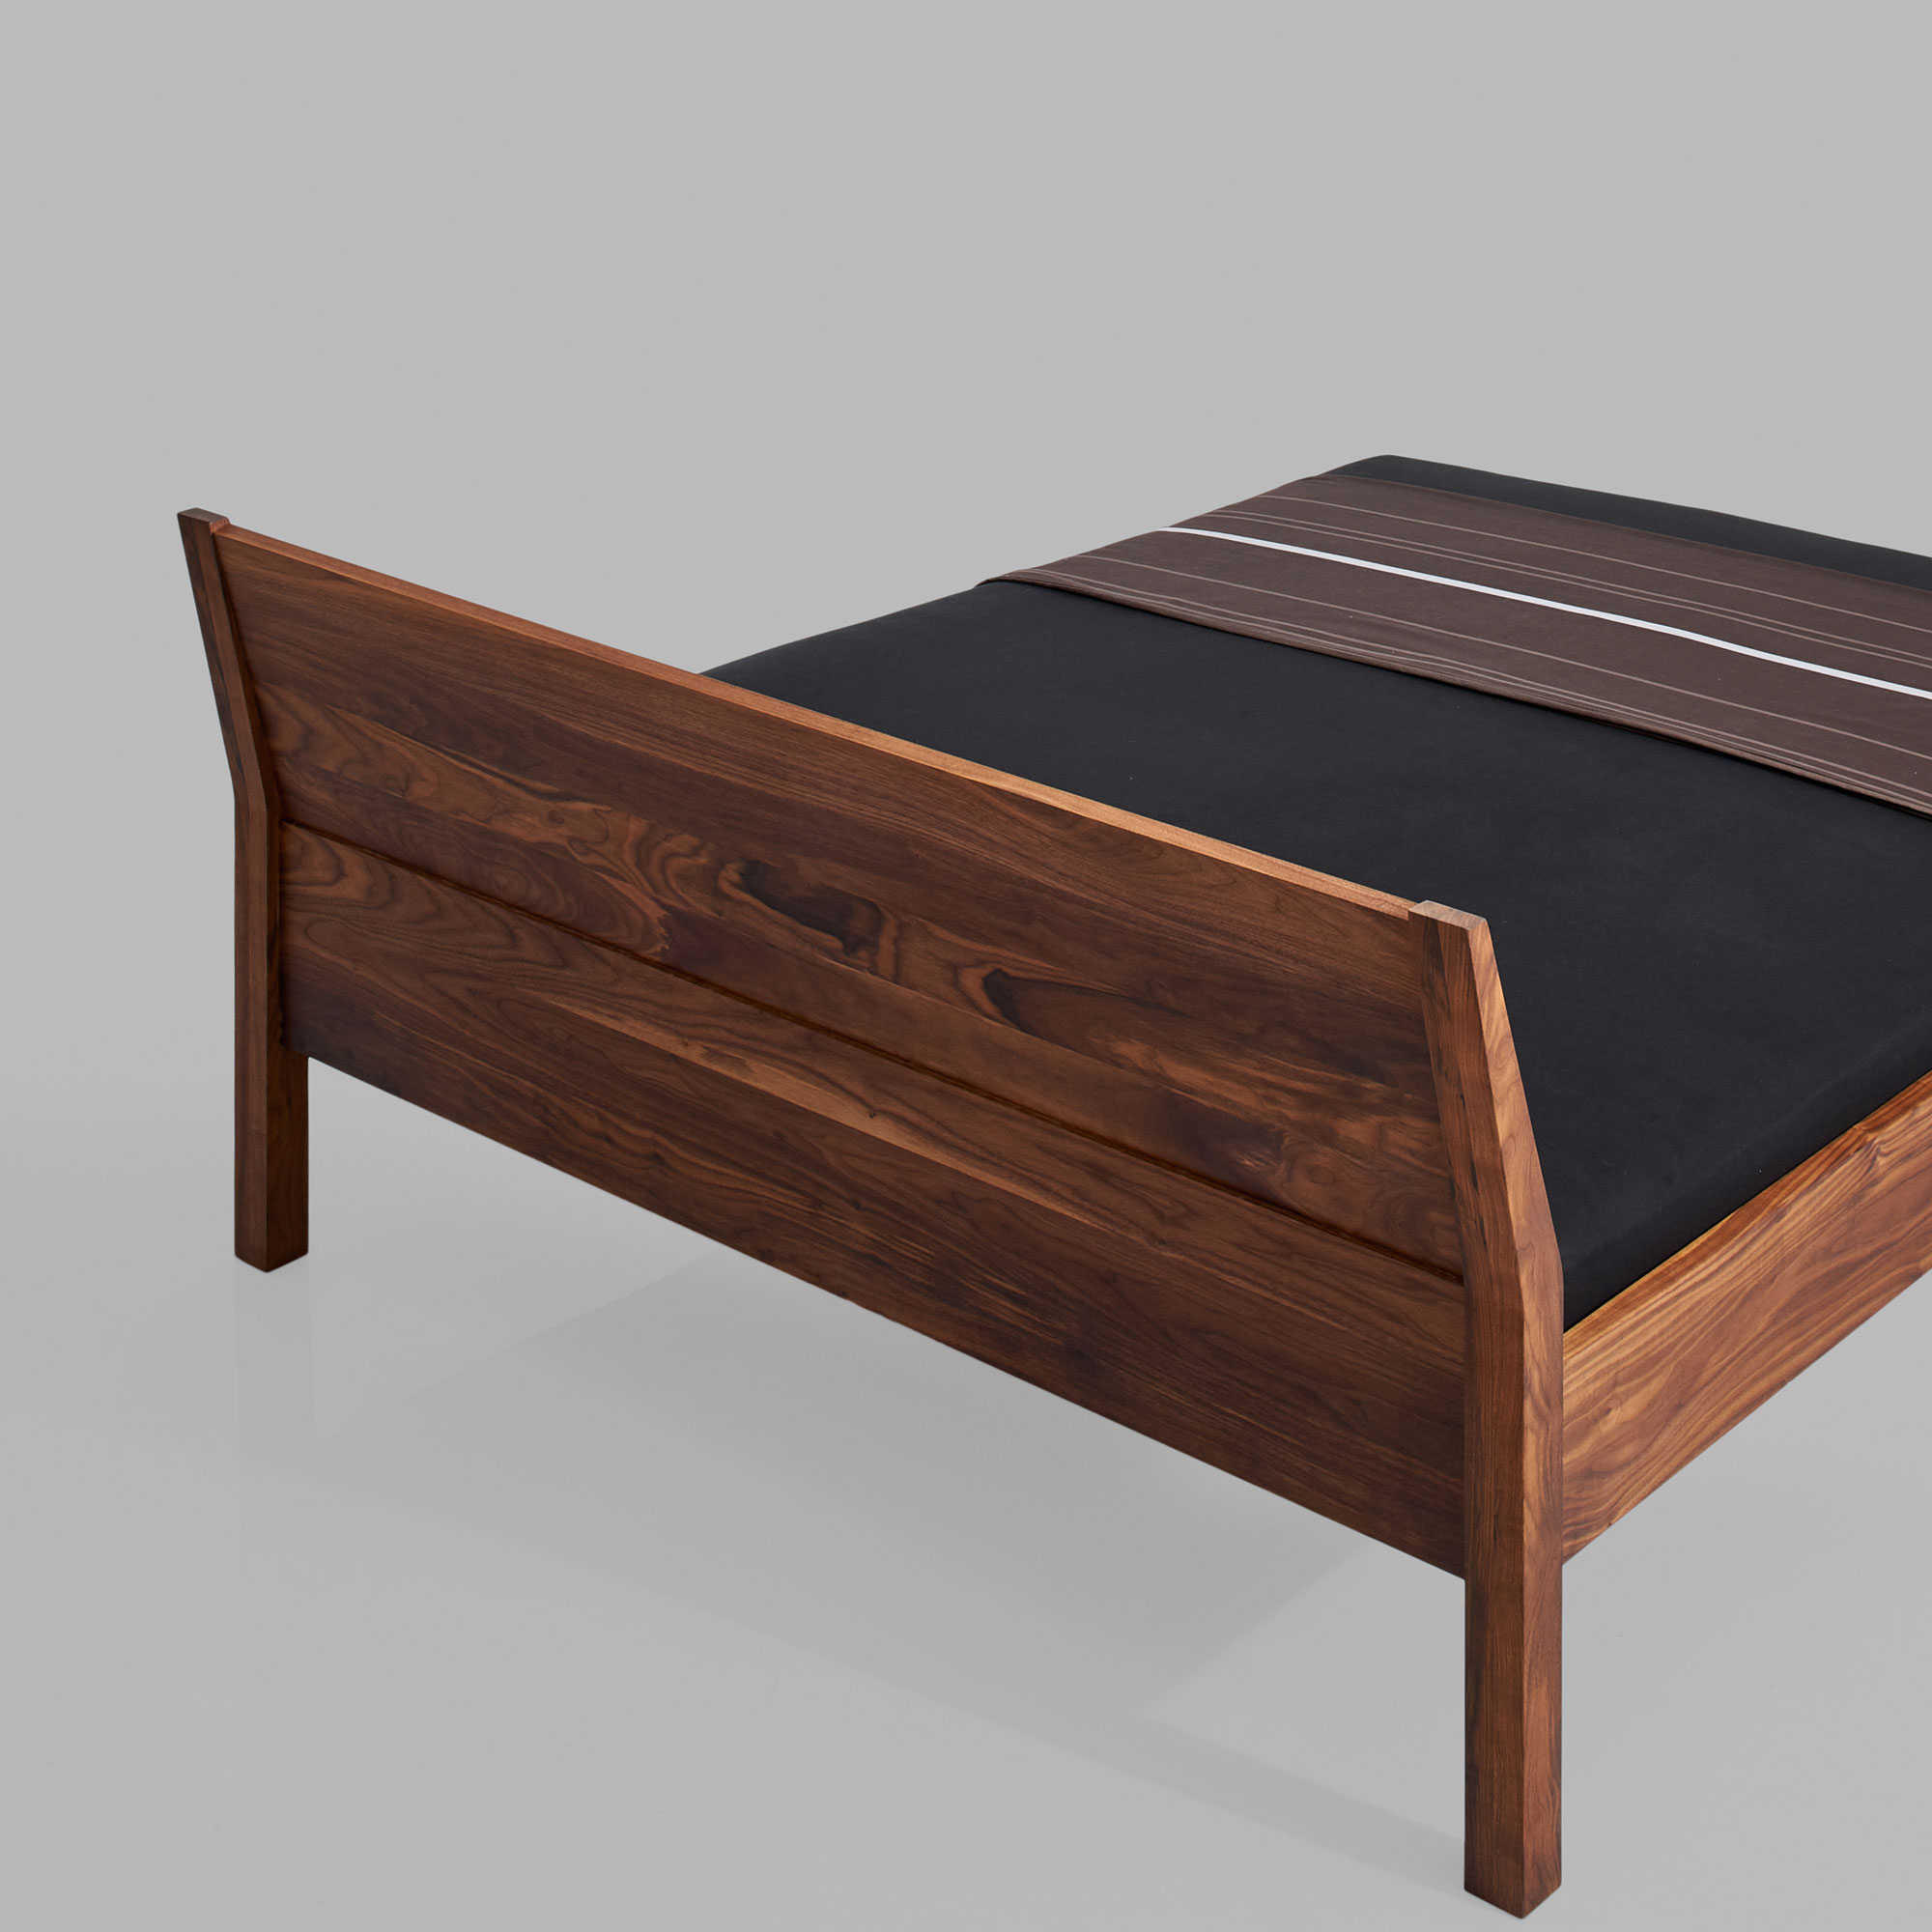 Wooden Bed VILLA Lv2845cut custom made in solid wood by vitamin design